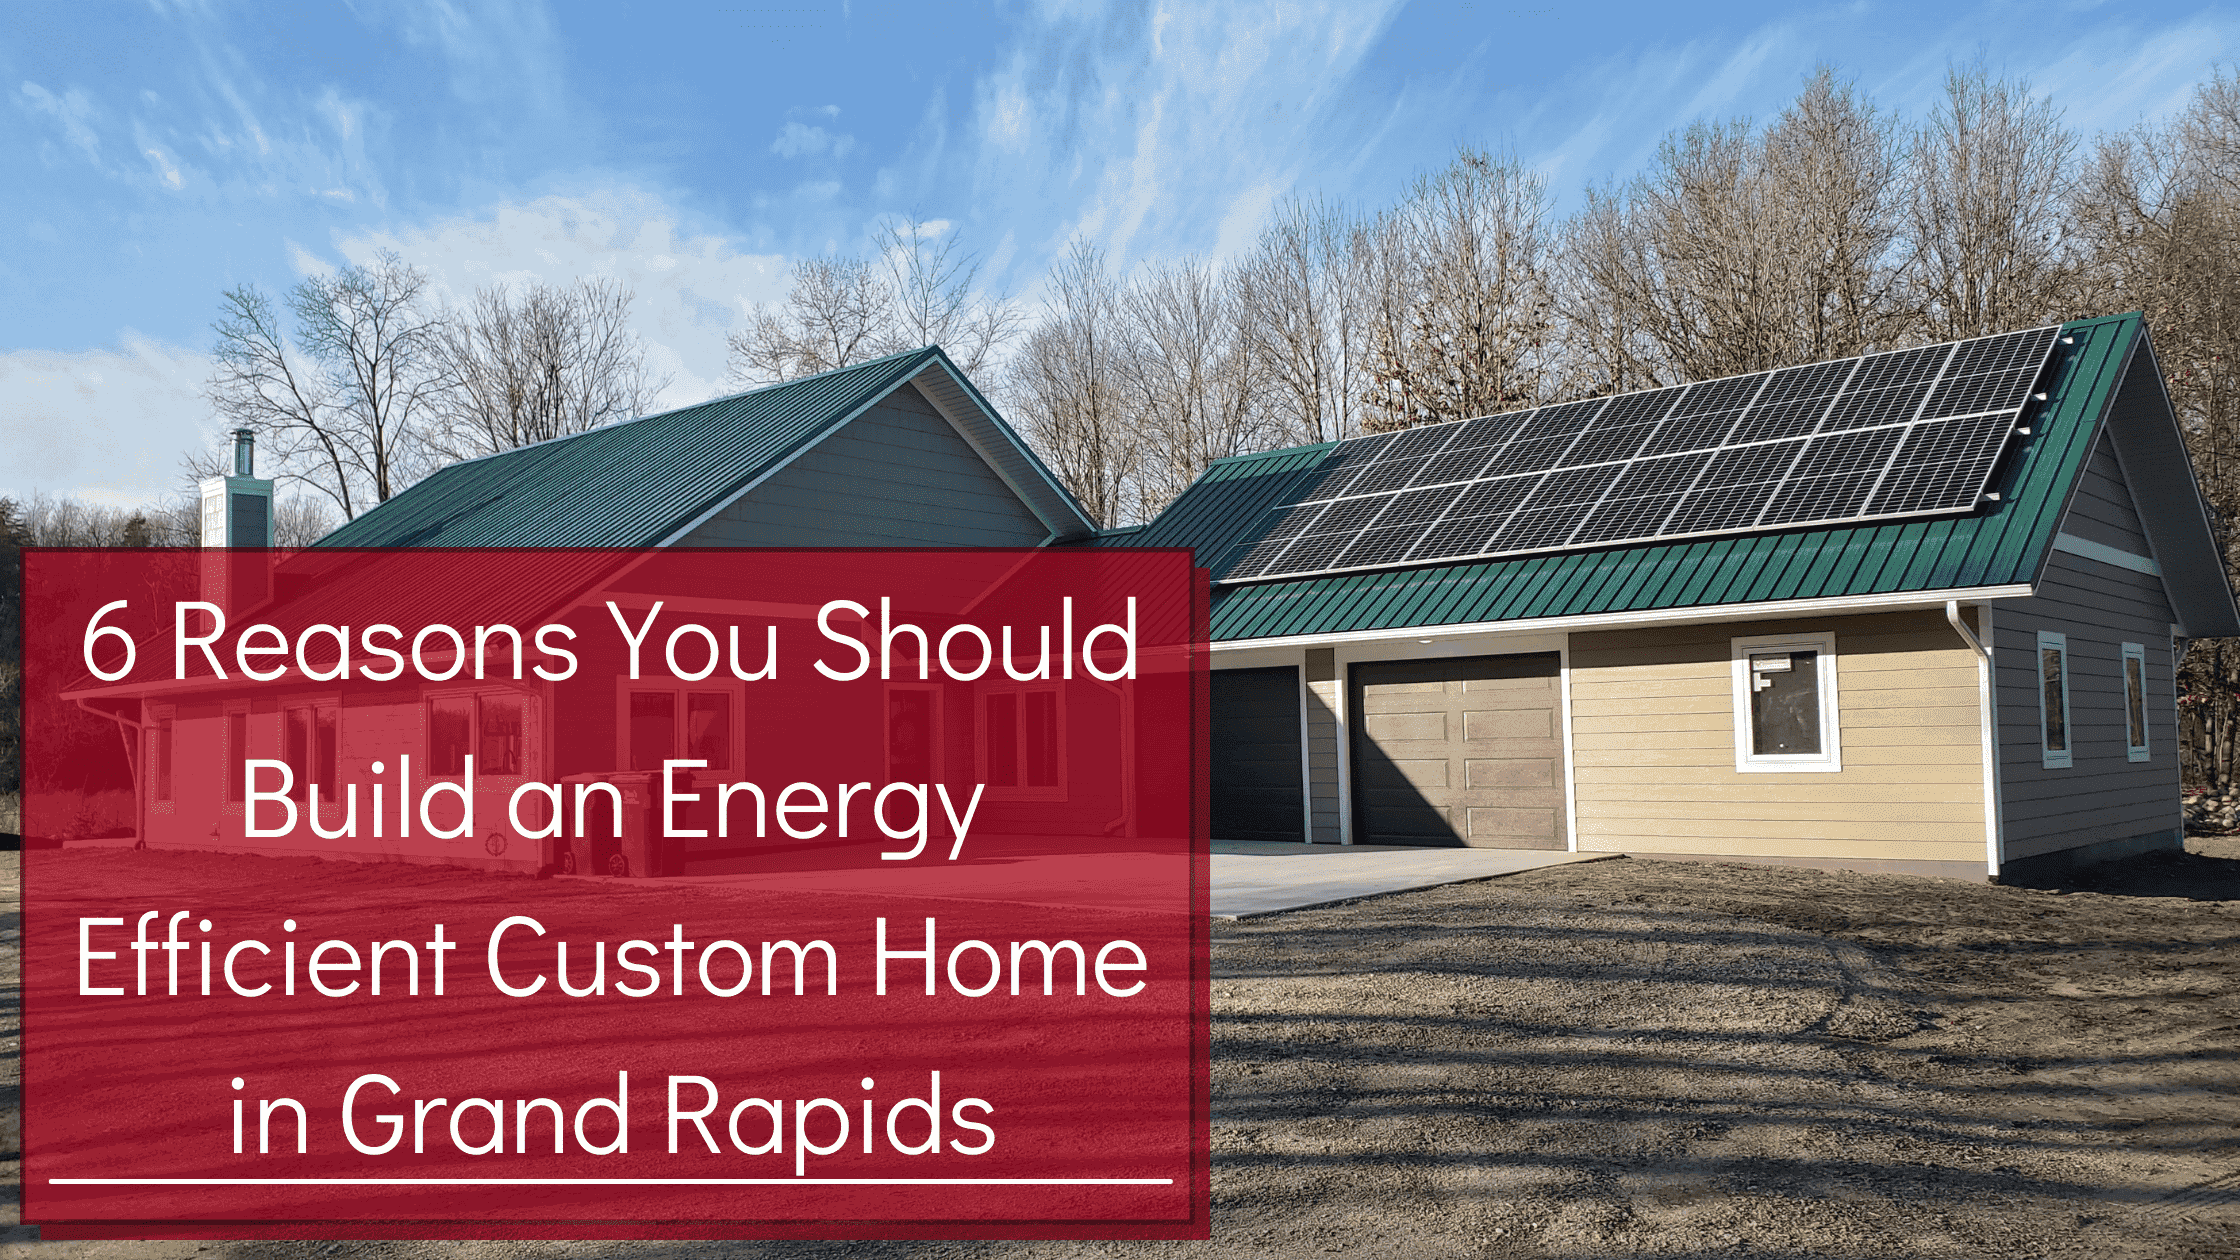 6 Reasons You Should Build an Energy Efficient Custom Home in Grand Rapids